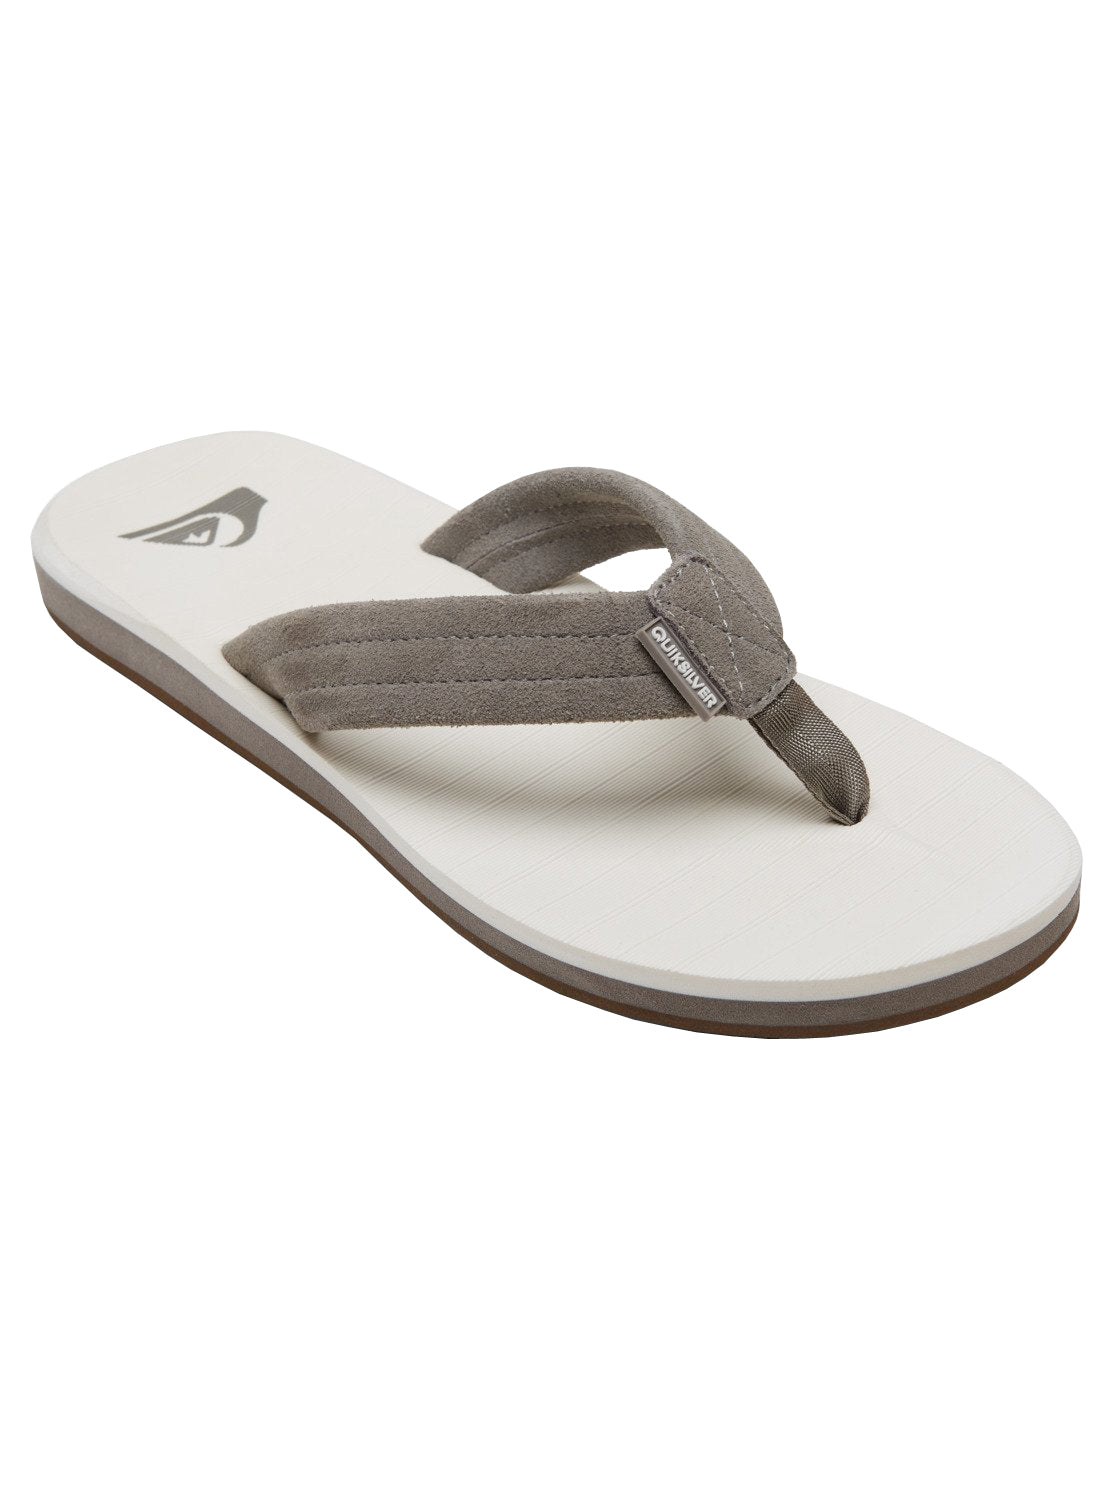 Quiksilver Carver Suede Mens Sandal XSWS-Grey-White-Grey 7